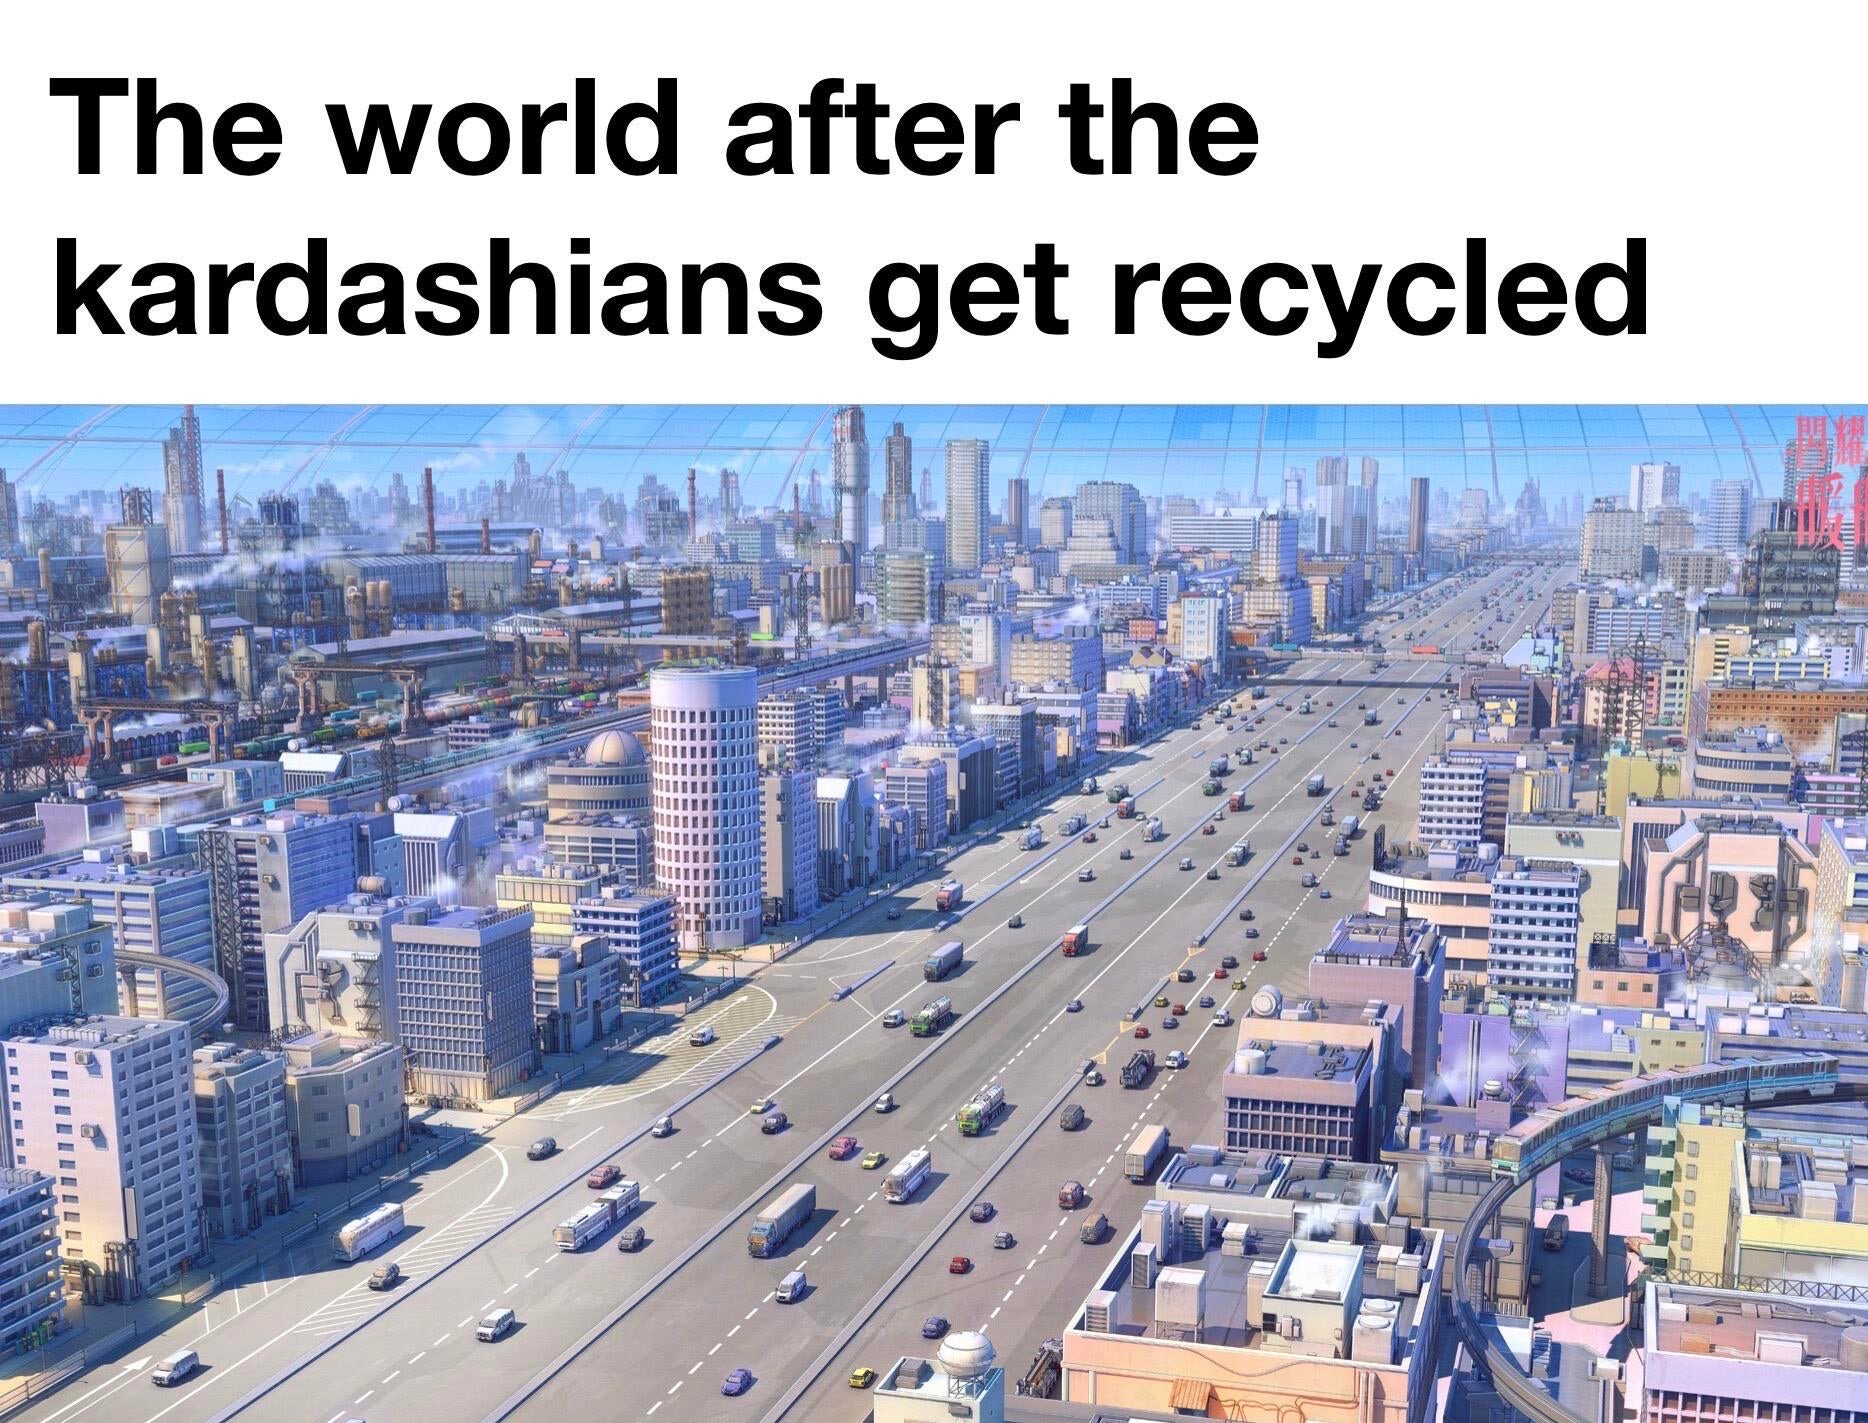 metropolitan area - The world after the kardashians get recycled Filt